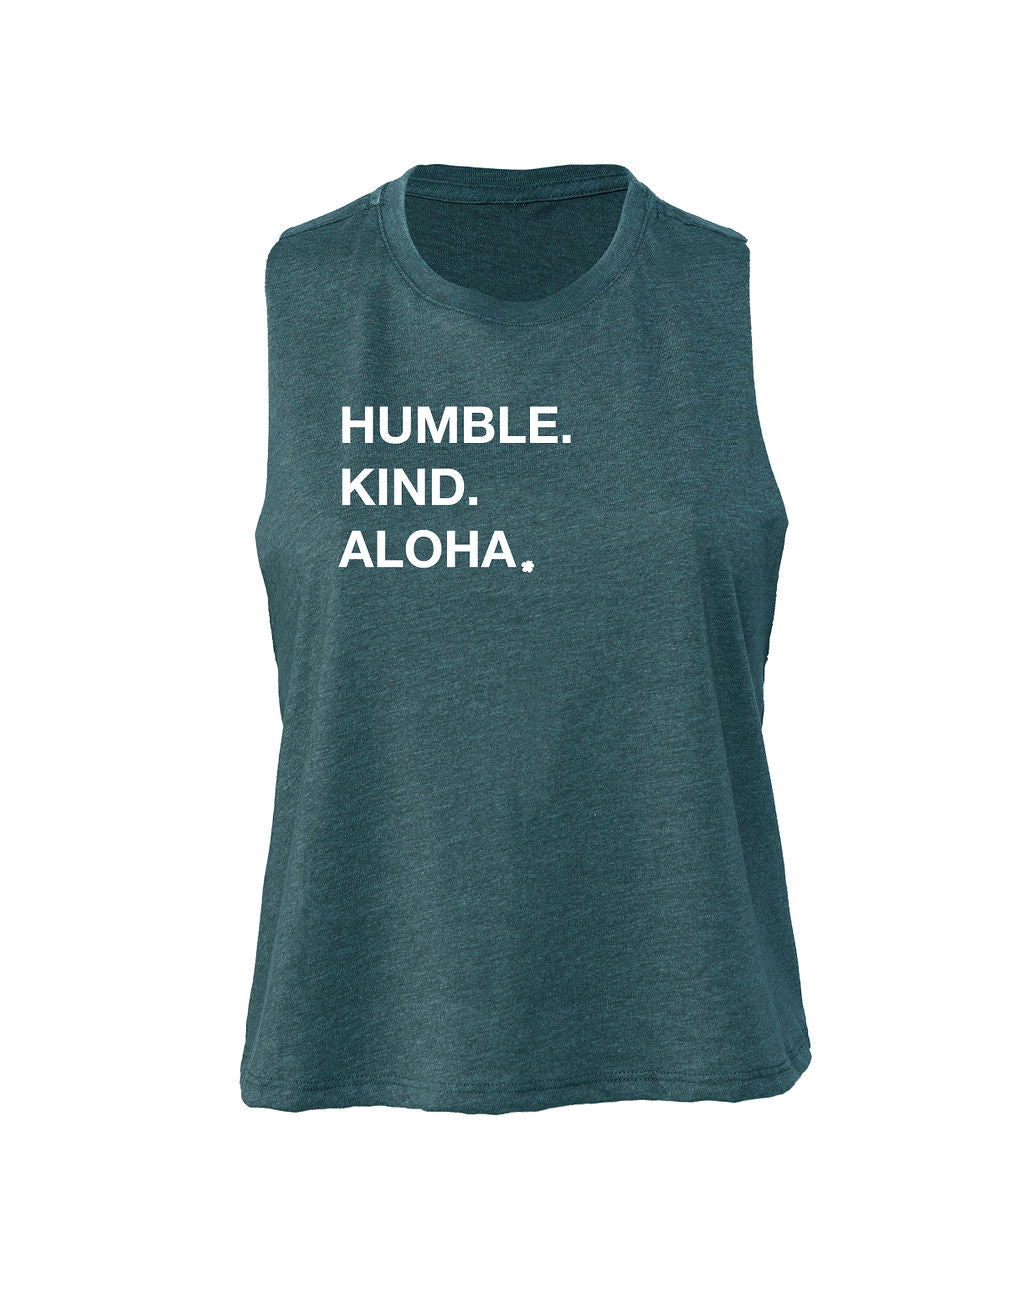 Our Humble Kind Aloha design printed on front chest of deep teal cropped racerback tank in white